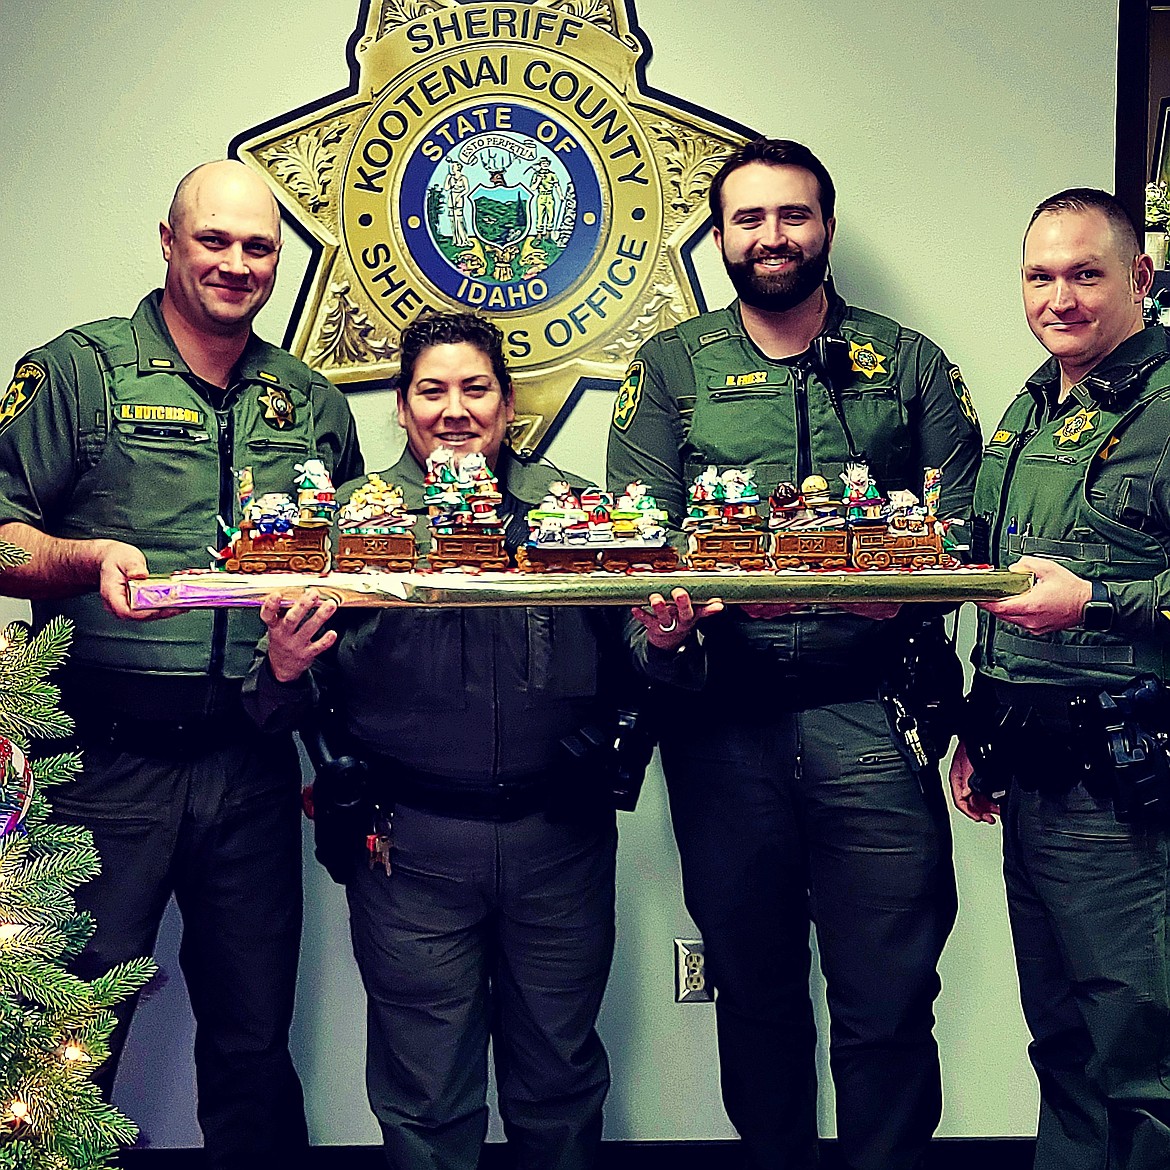 Lt. Hutchison, Deputy Heavey, Deputy Friesz, and Lt. Peterson with the Kootenai County Sheriff's Office proudly display their gingerbread train.